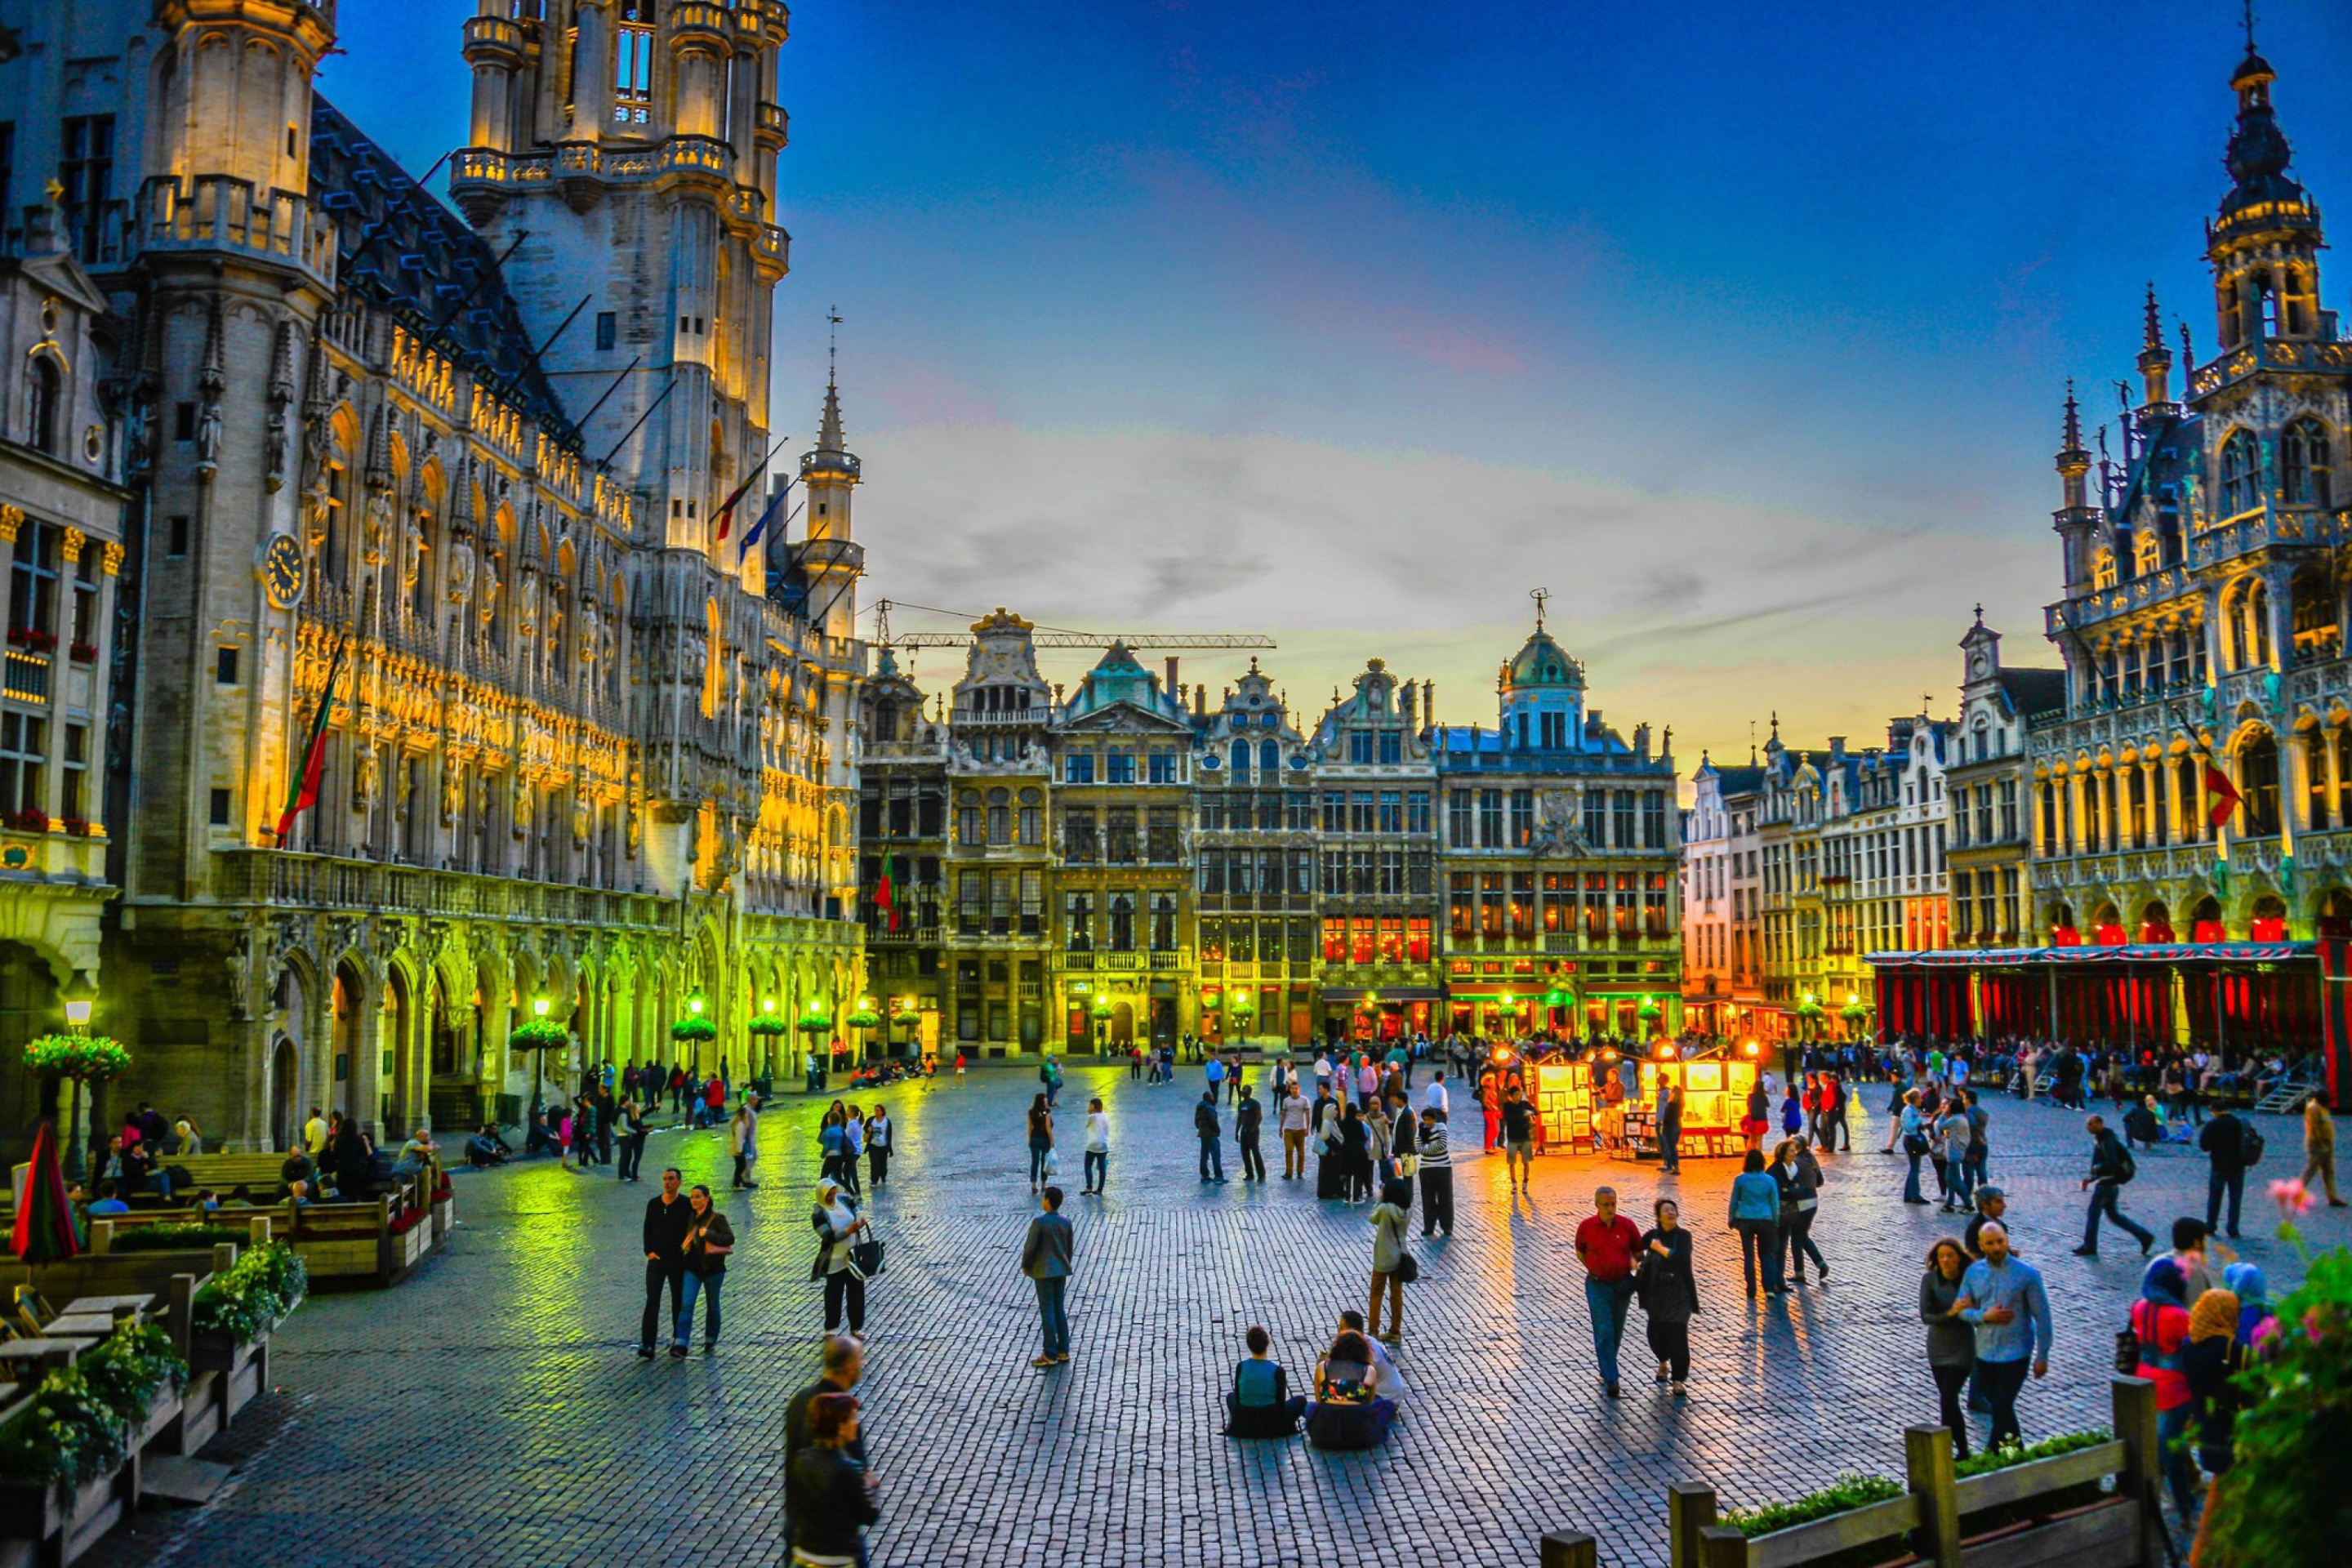 Das Grand place by night in Brussels Wallpaper 2880x1920